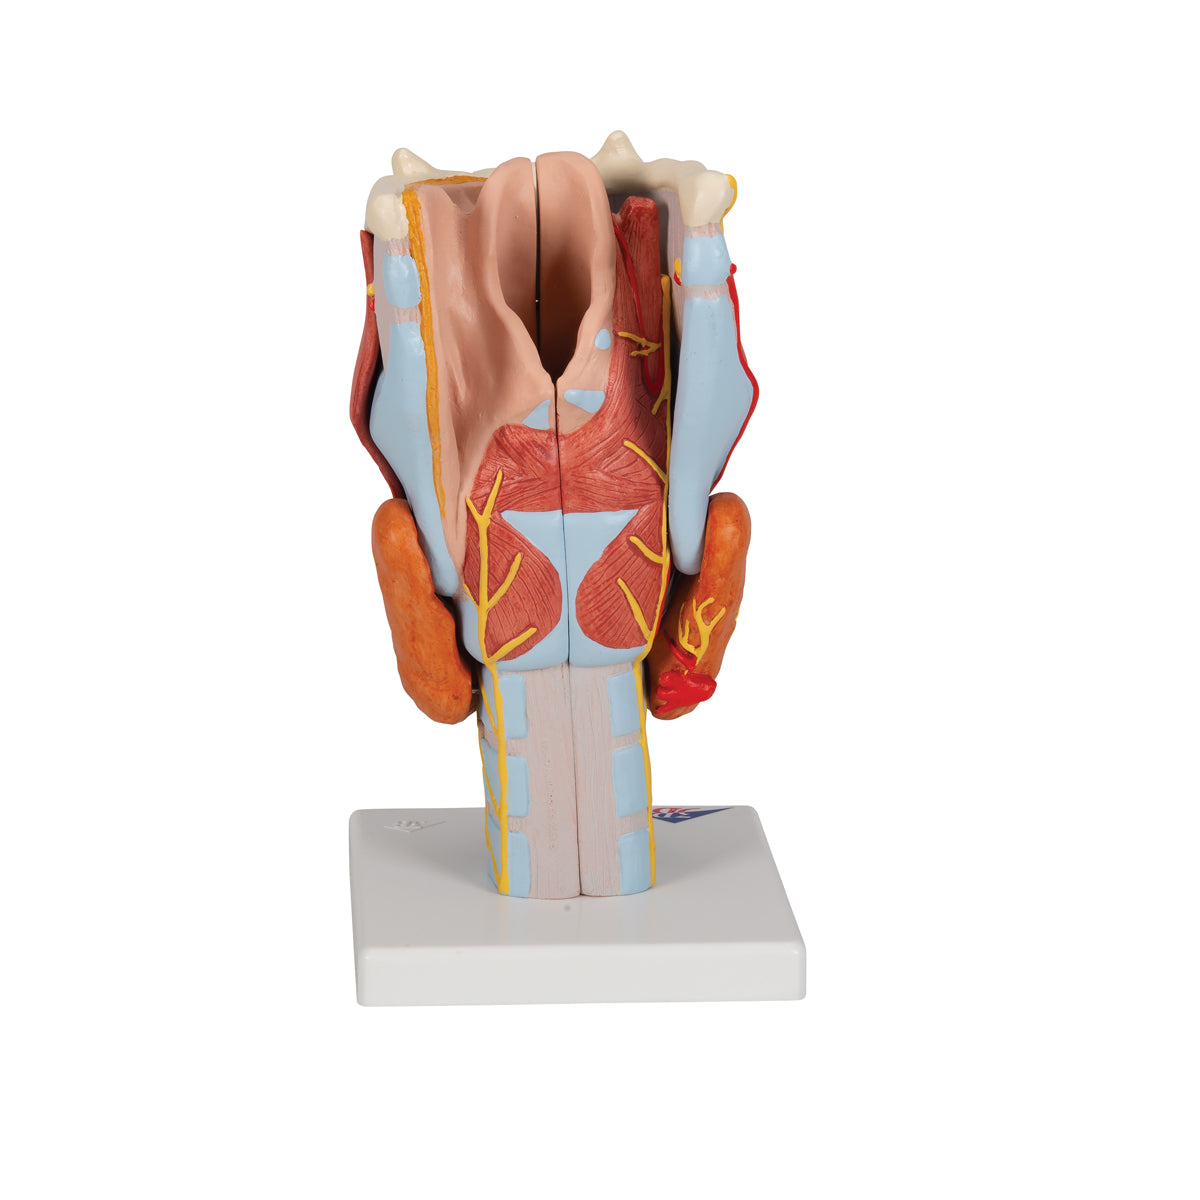 Enlarged larynx model with vocal folds and several other tissues. Can be separated into 7 parts